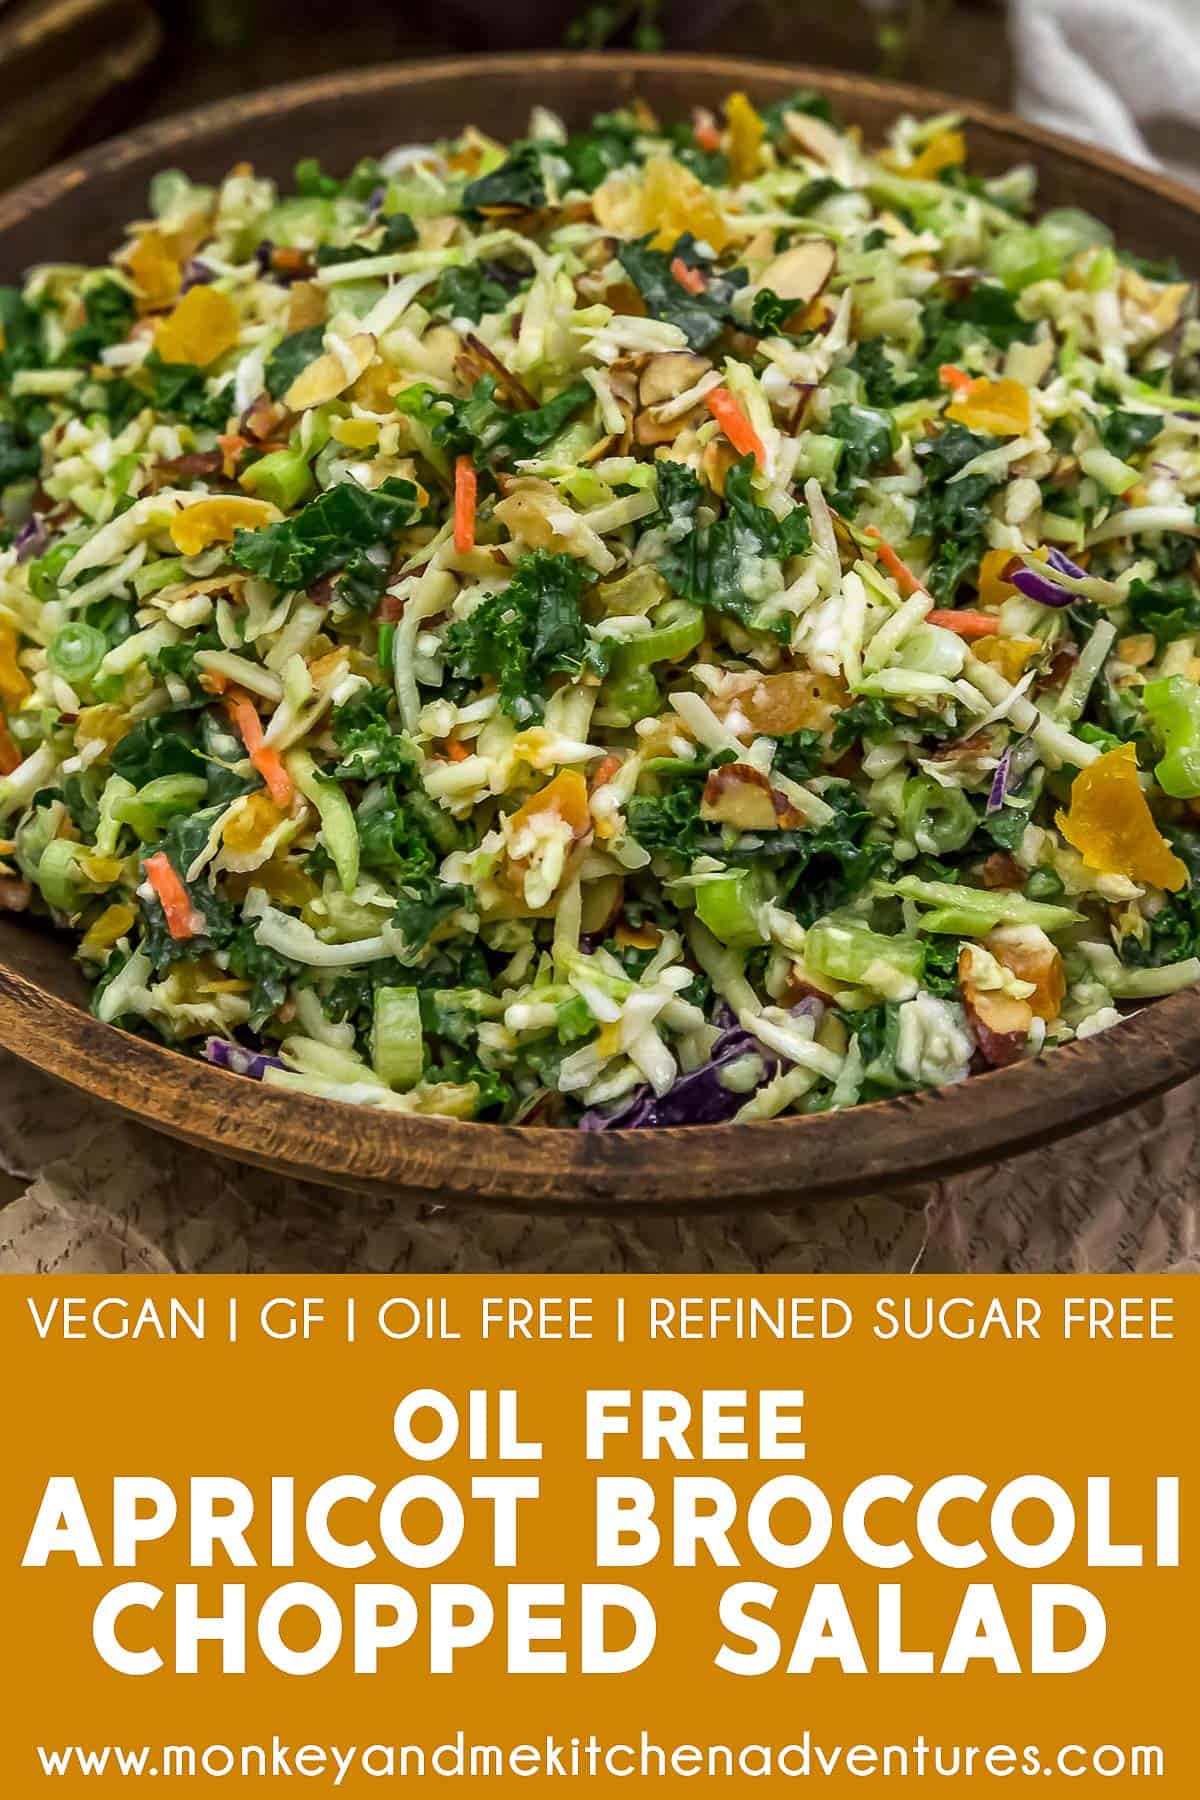 Oil Free Apricot Broccoli Chopped Salad with Text Description